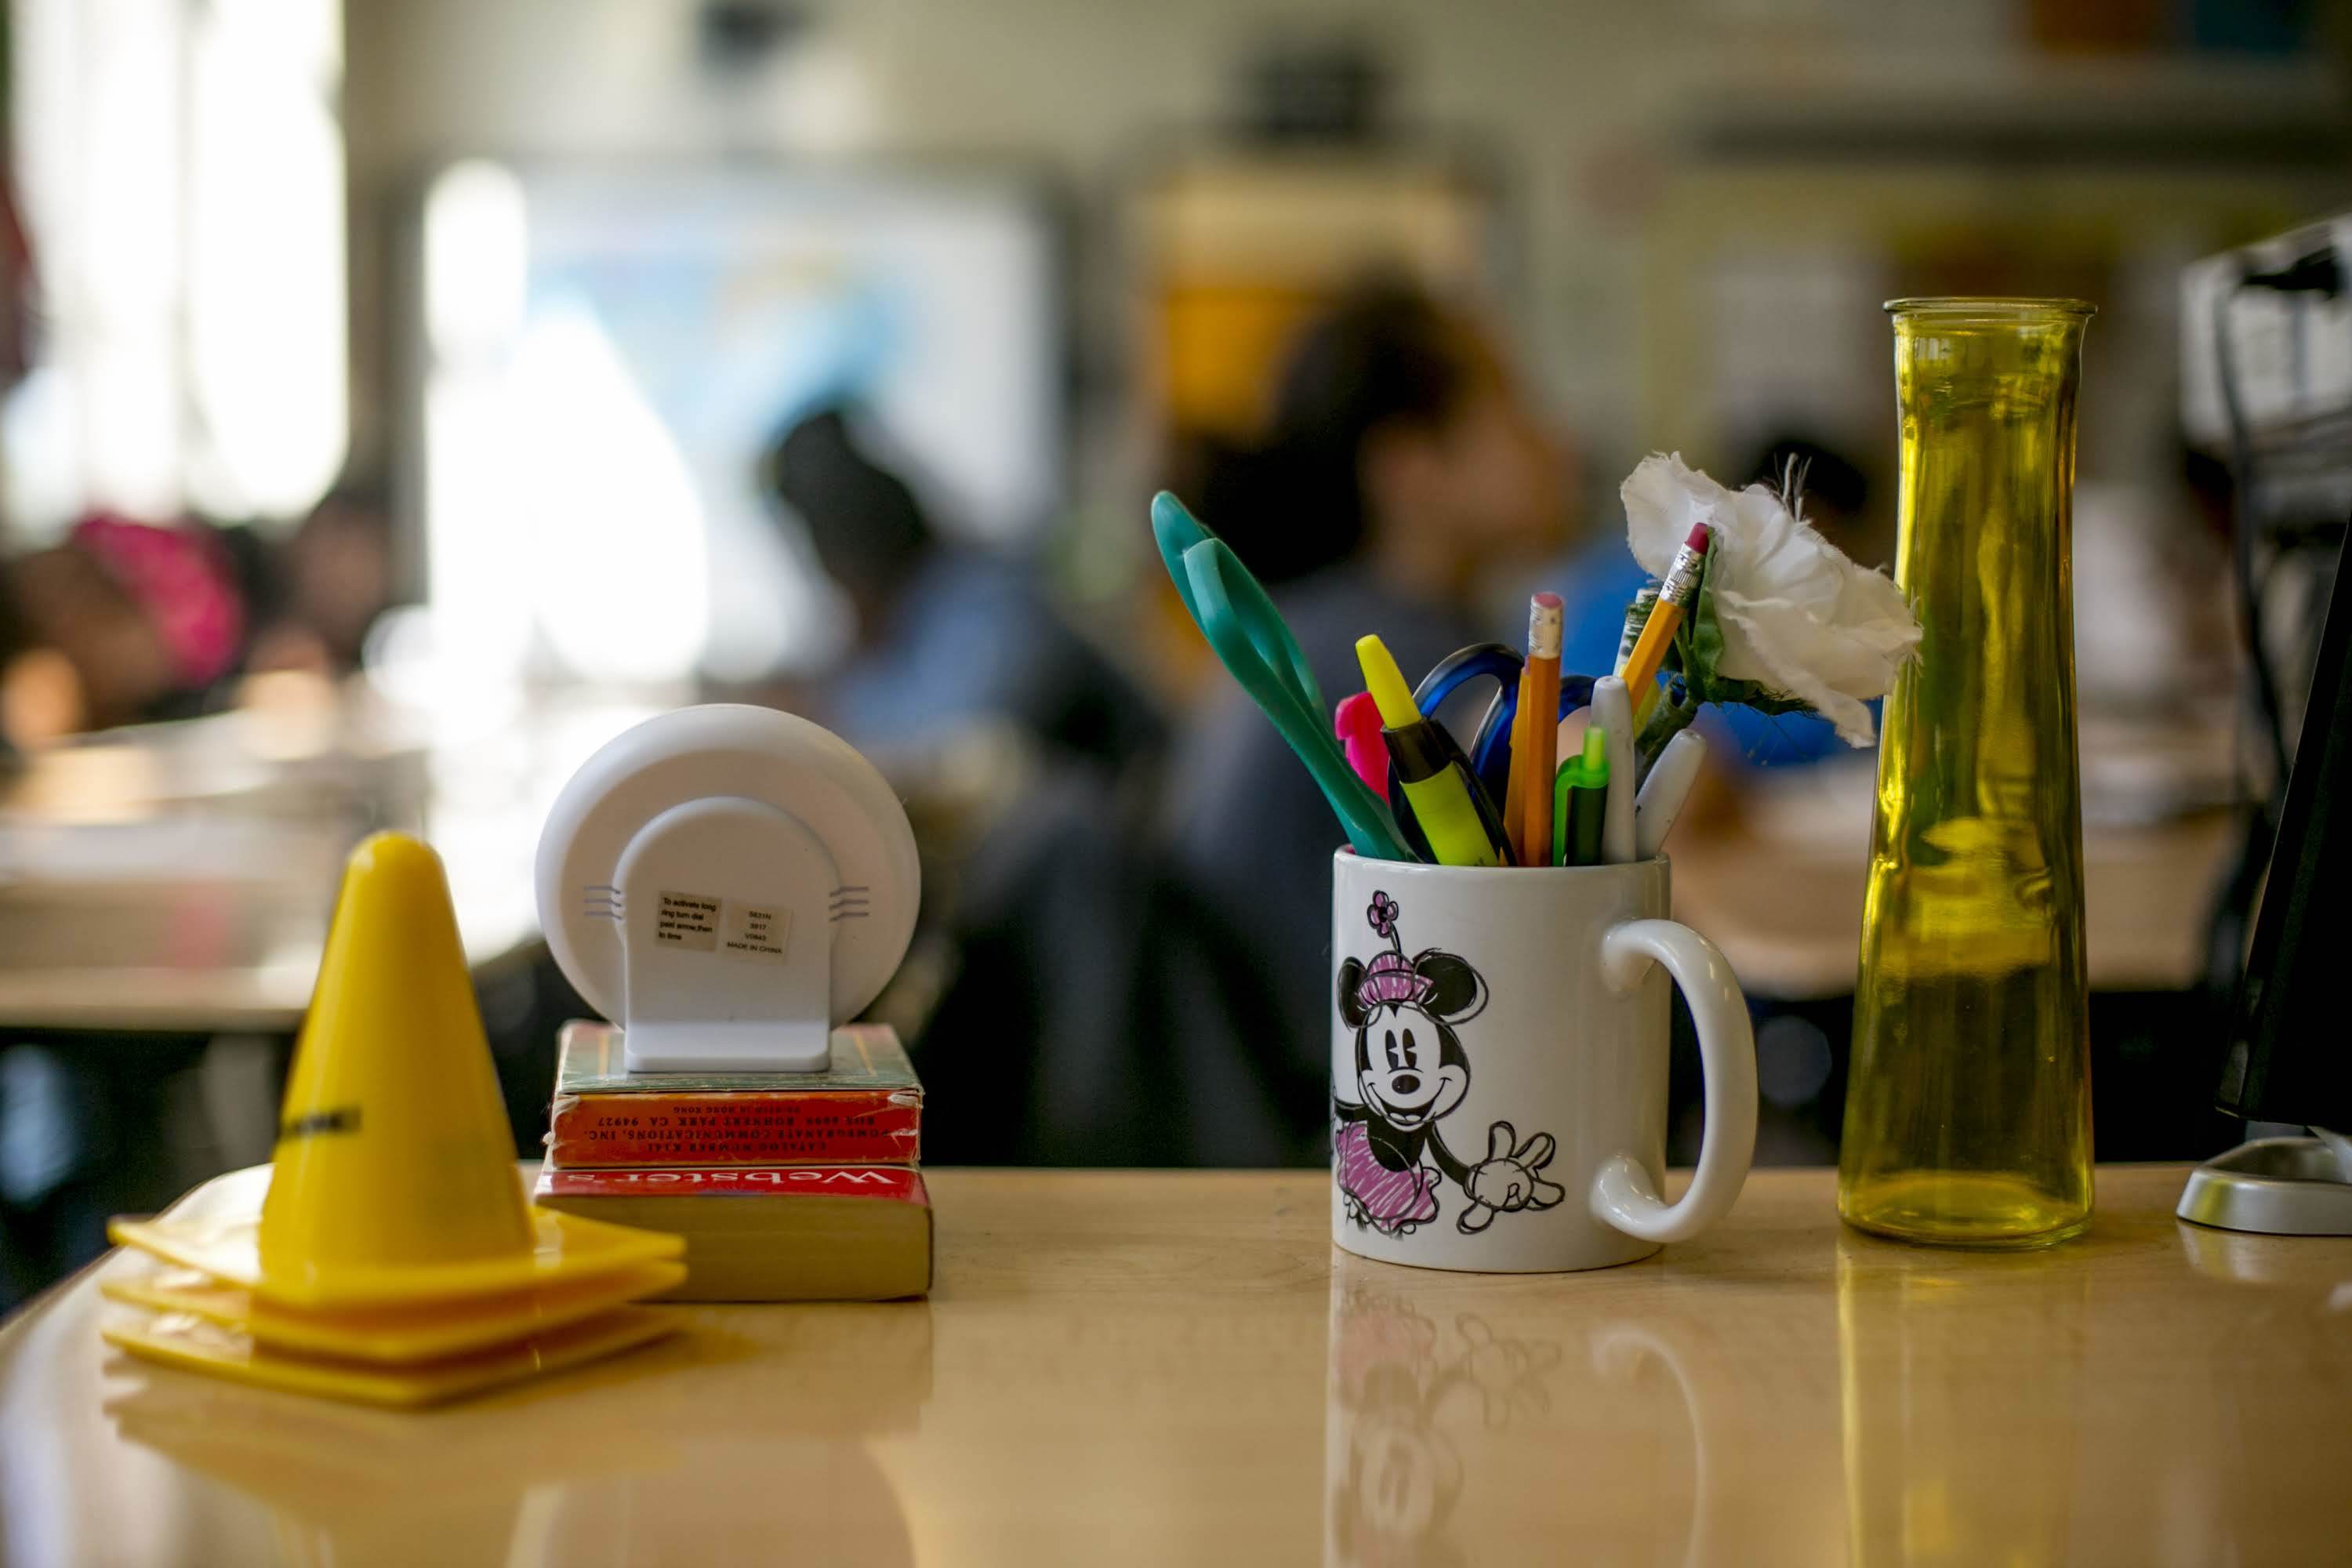 Markers, pencils and pens in a Minnie Mouse coffee cup, small yellow cones, a dictionary, and other items sit atop a desk in a classroom.